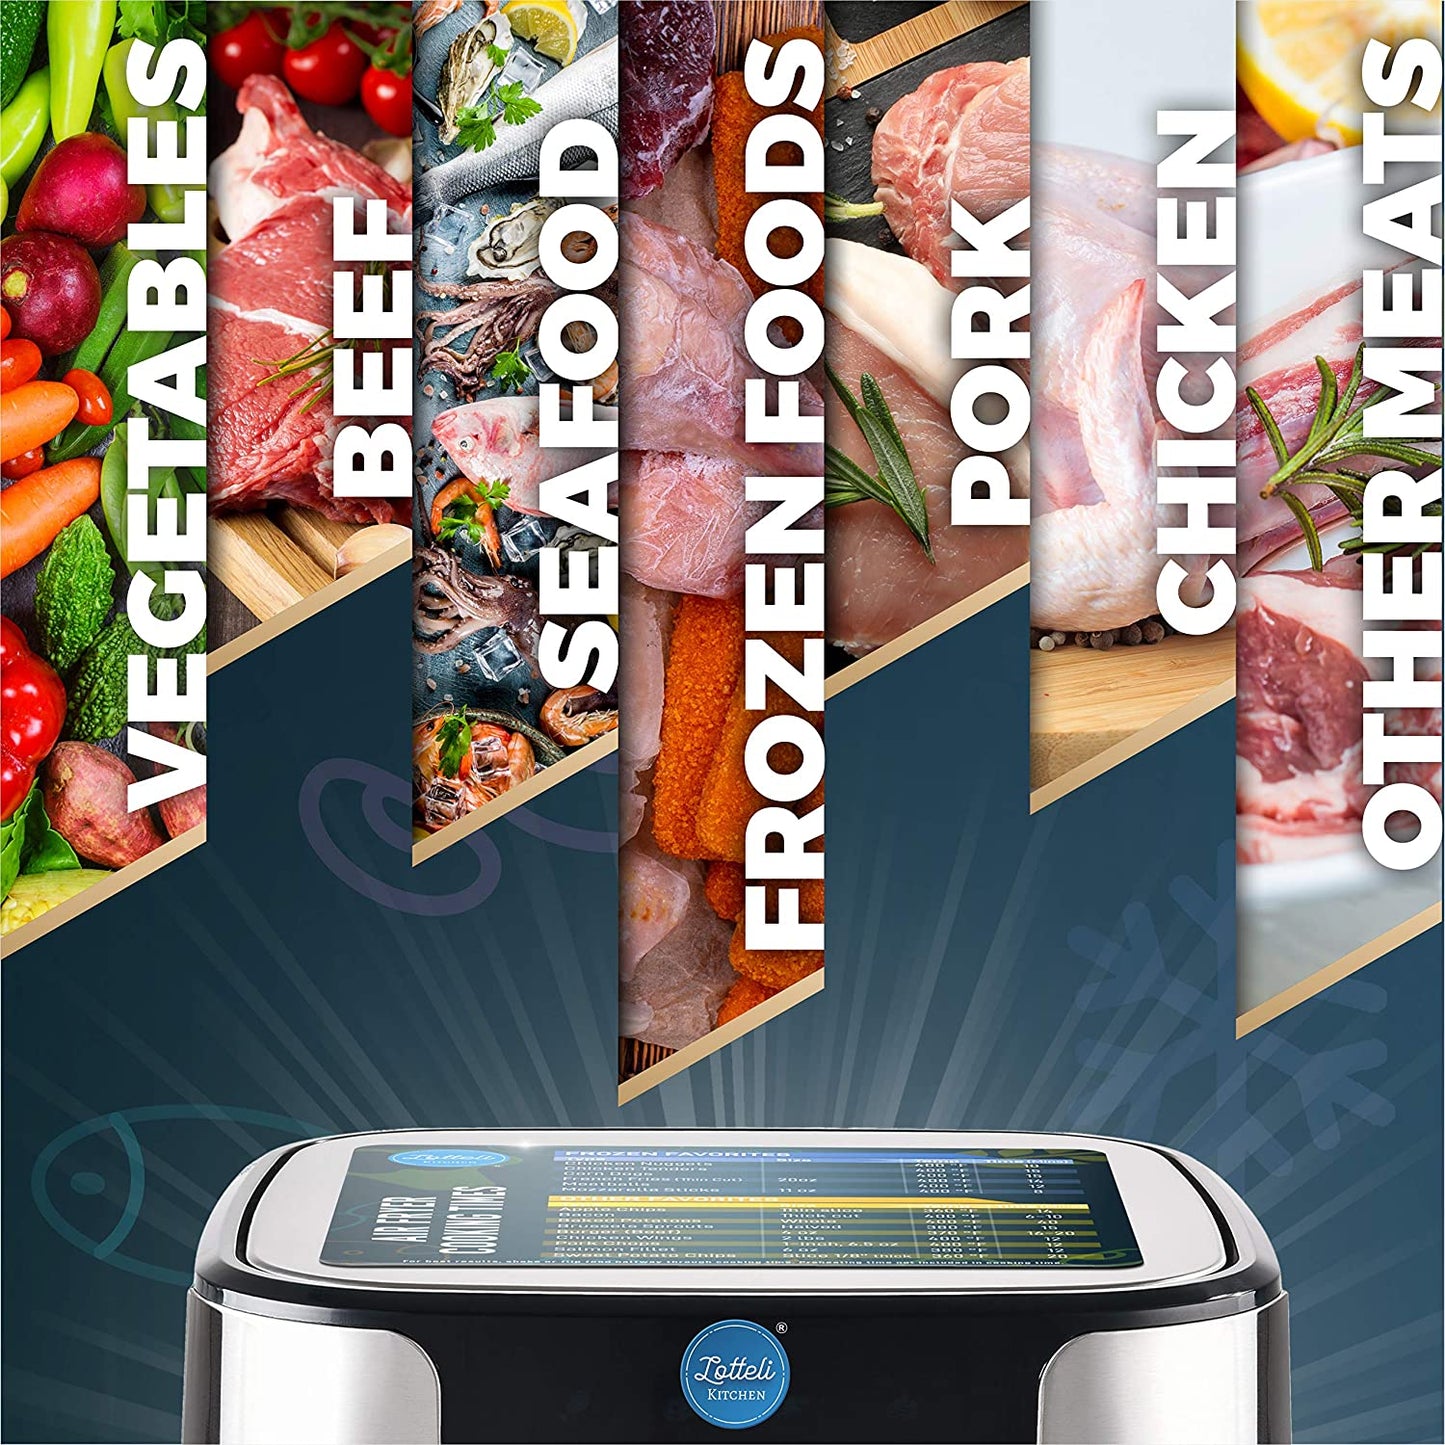 An air fryer with various food images in a collage above the fryer. The text reads, 'Vegetables, beef, seafood, frozen foods, pork, chicken, other meats.'